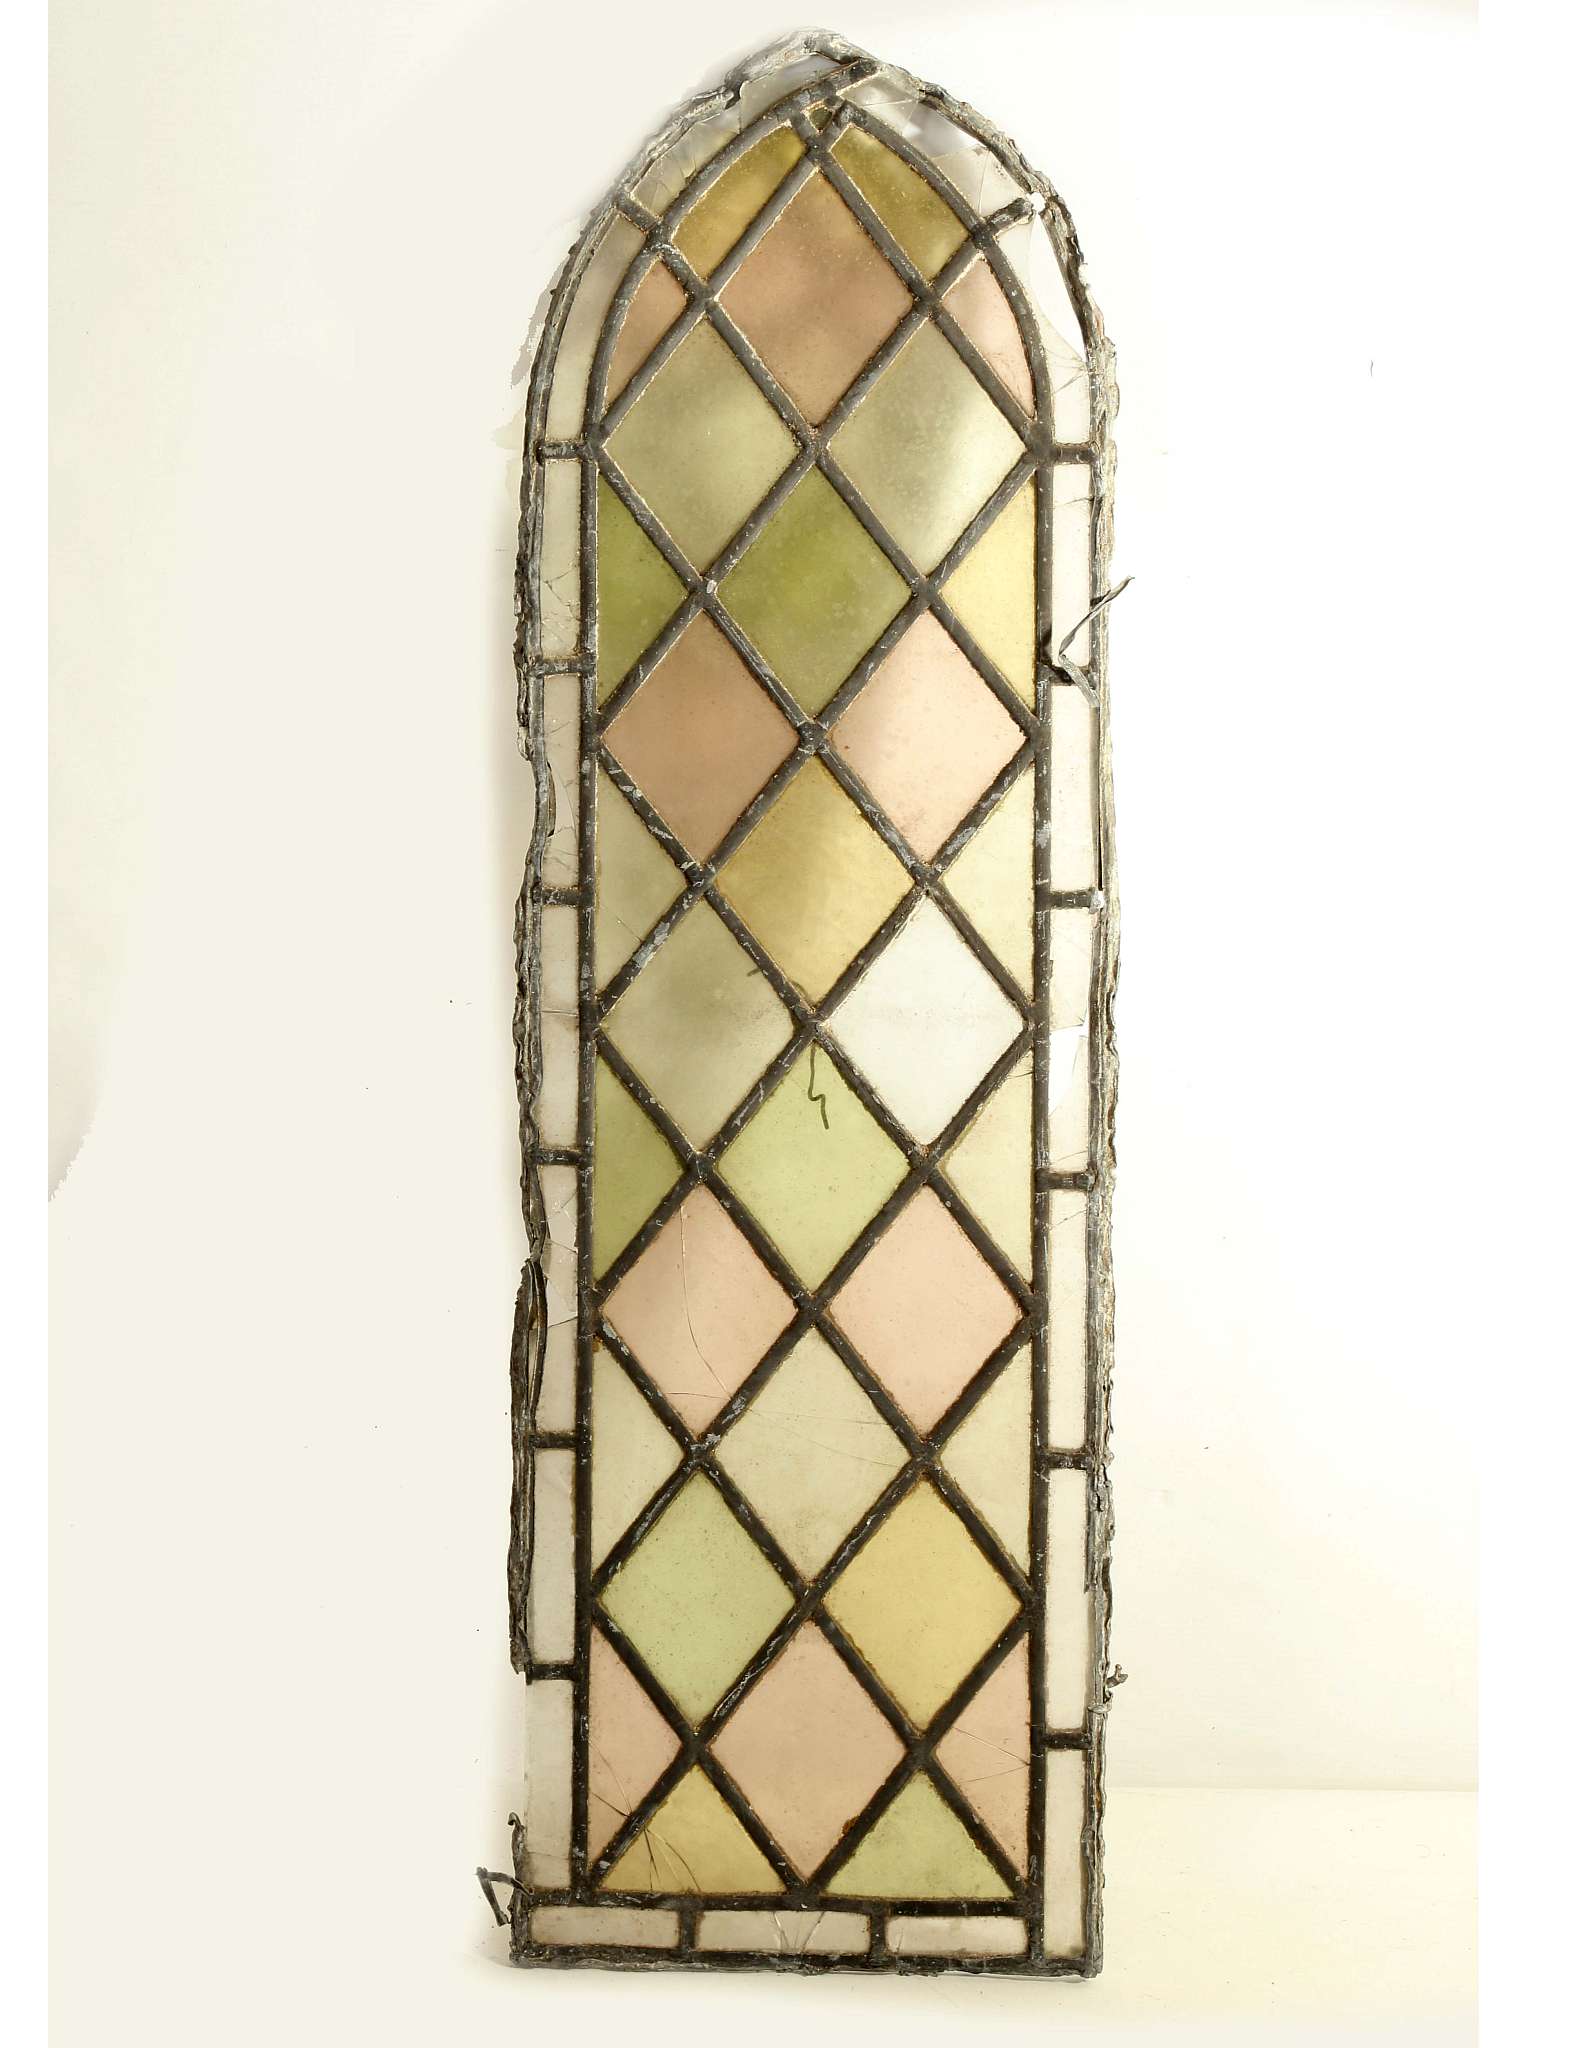 AN EXCEPTIONAL SET OF FOUR AESTHETIC PERIOD ECCLESIASTICAL PAINTED AND LEADED GLASS WINDOW PANELS, - Image 11 of 11